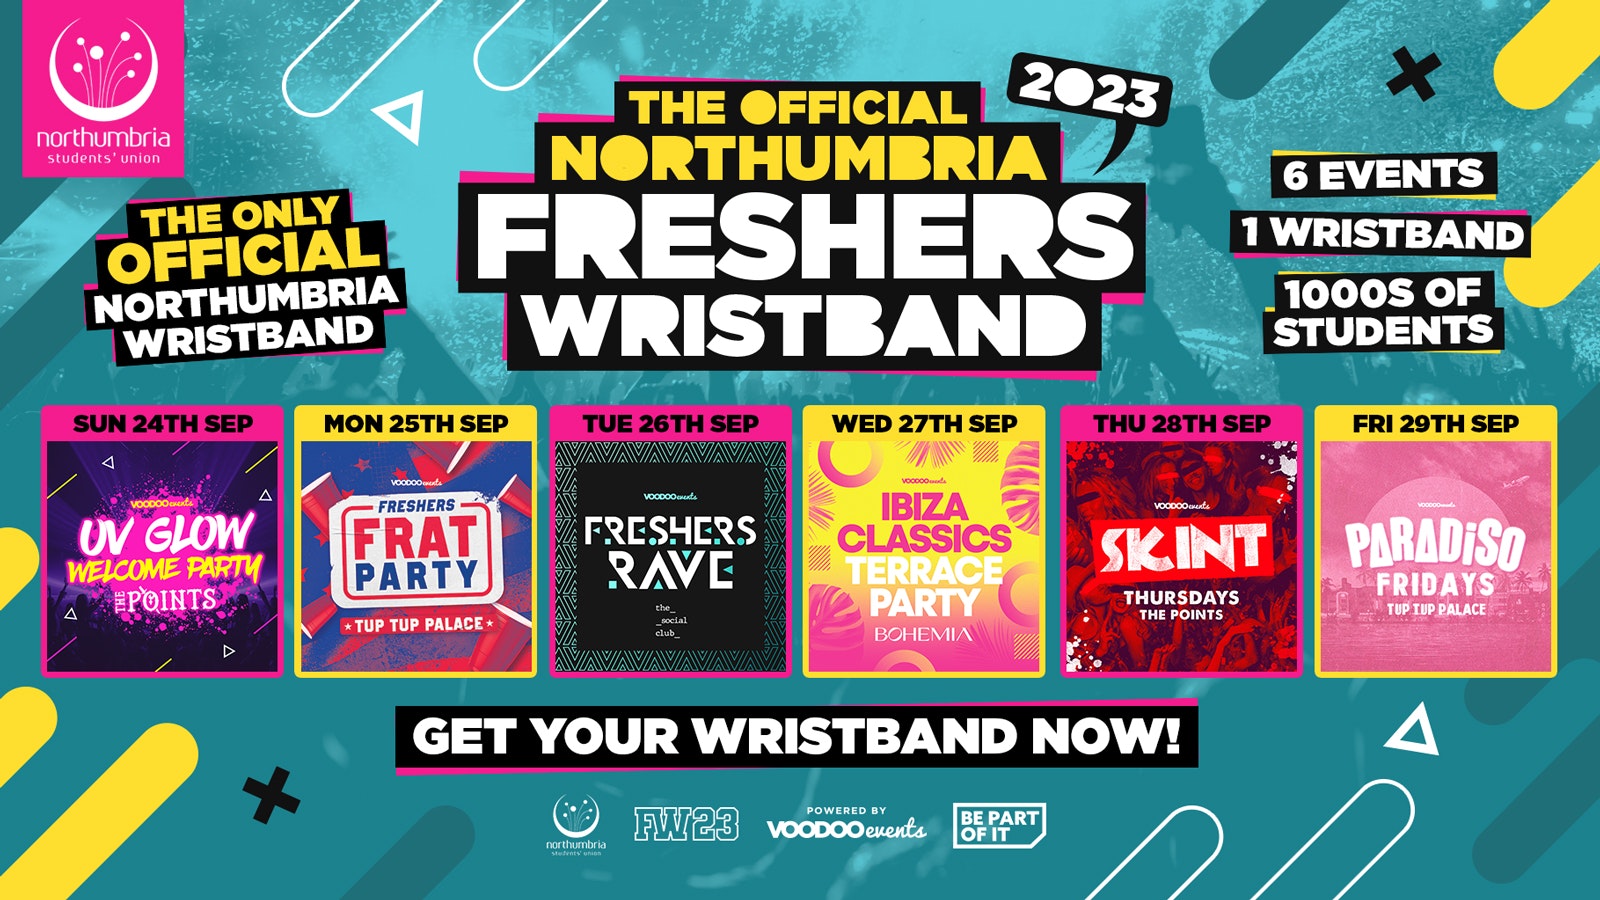 THE OFFICIAL NORTHUMBRIA FRESHERS WEEK WRISTBAND